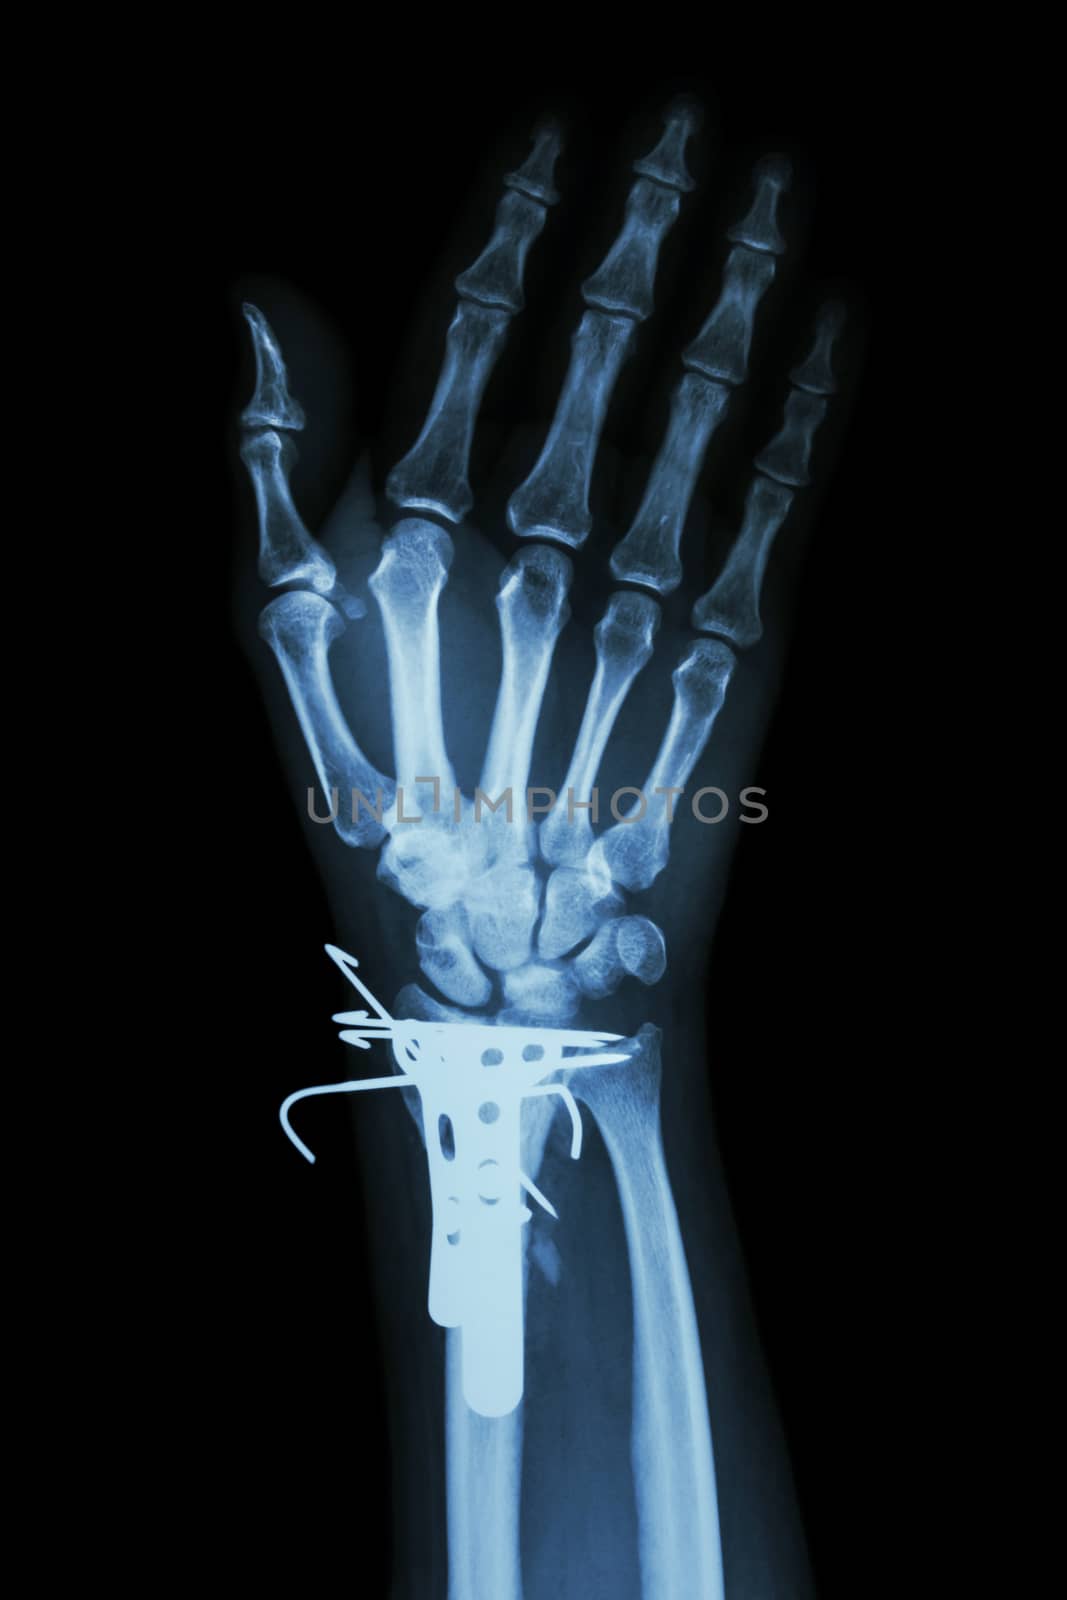 film x-ray wrist AP : show fracture distal radius (forearm's bone). It was operated and inserted plate and K-wire(Kirschner wire)